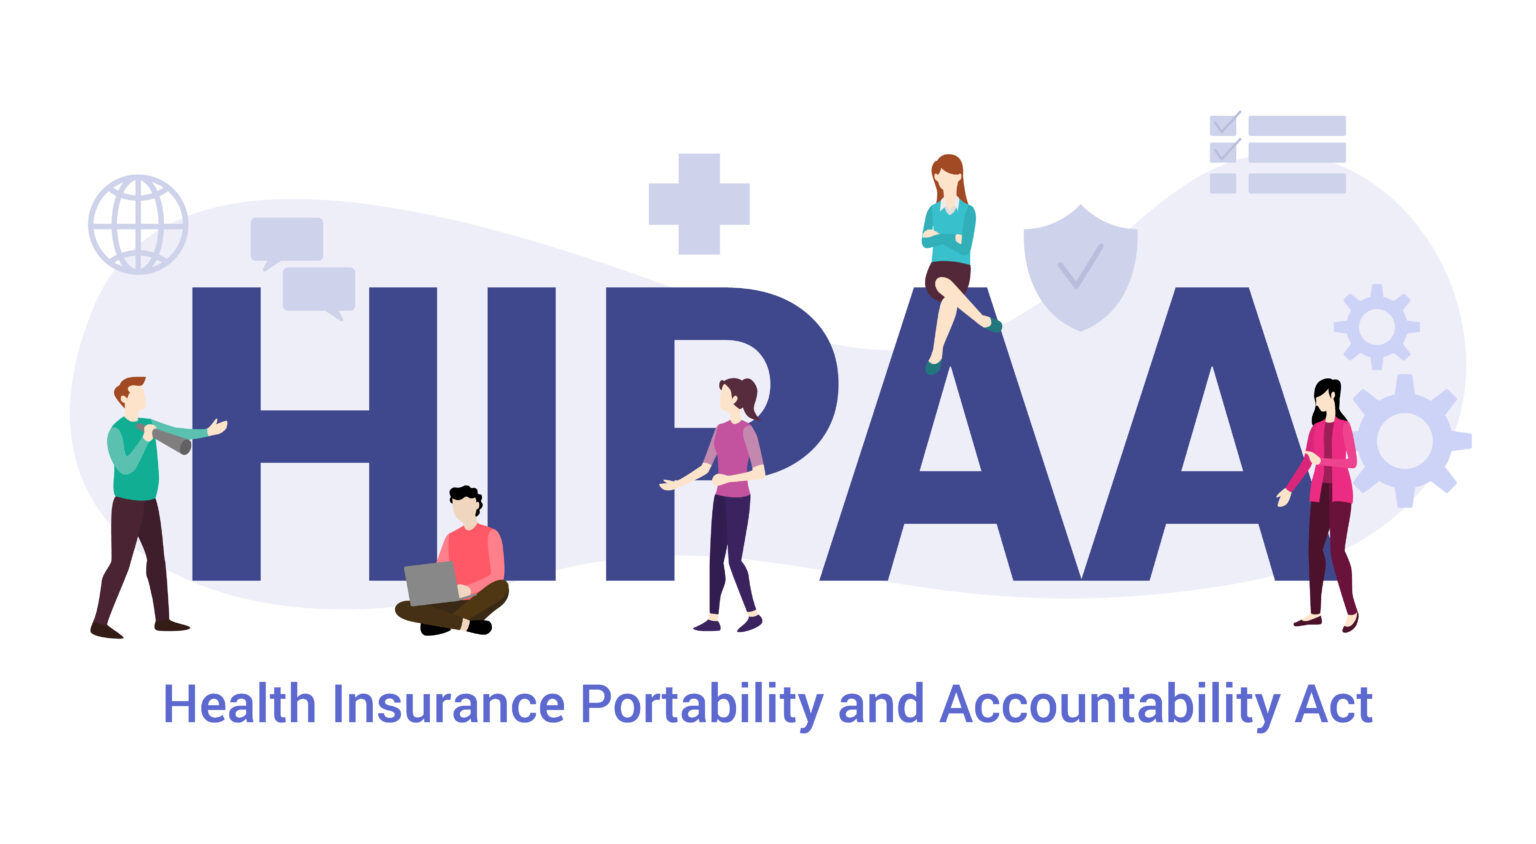 The word "HIPAA" is shown with the caption, "Health Insurance Portability and Accountability Act;" the reference is to how HIPAA rules & regulations under key HIPAA call center requirements protect healthcare data from unauthorized personnel access, ensuring that the risk of an unlawful data breach is kept low.